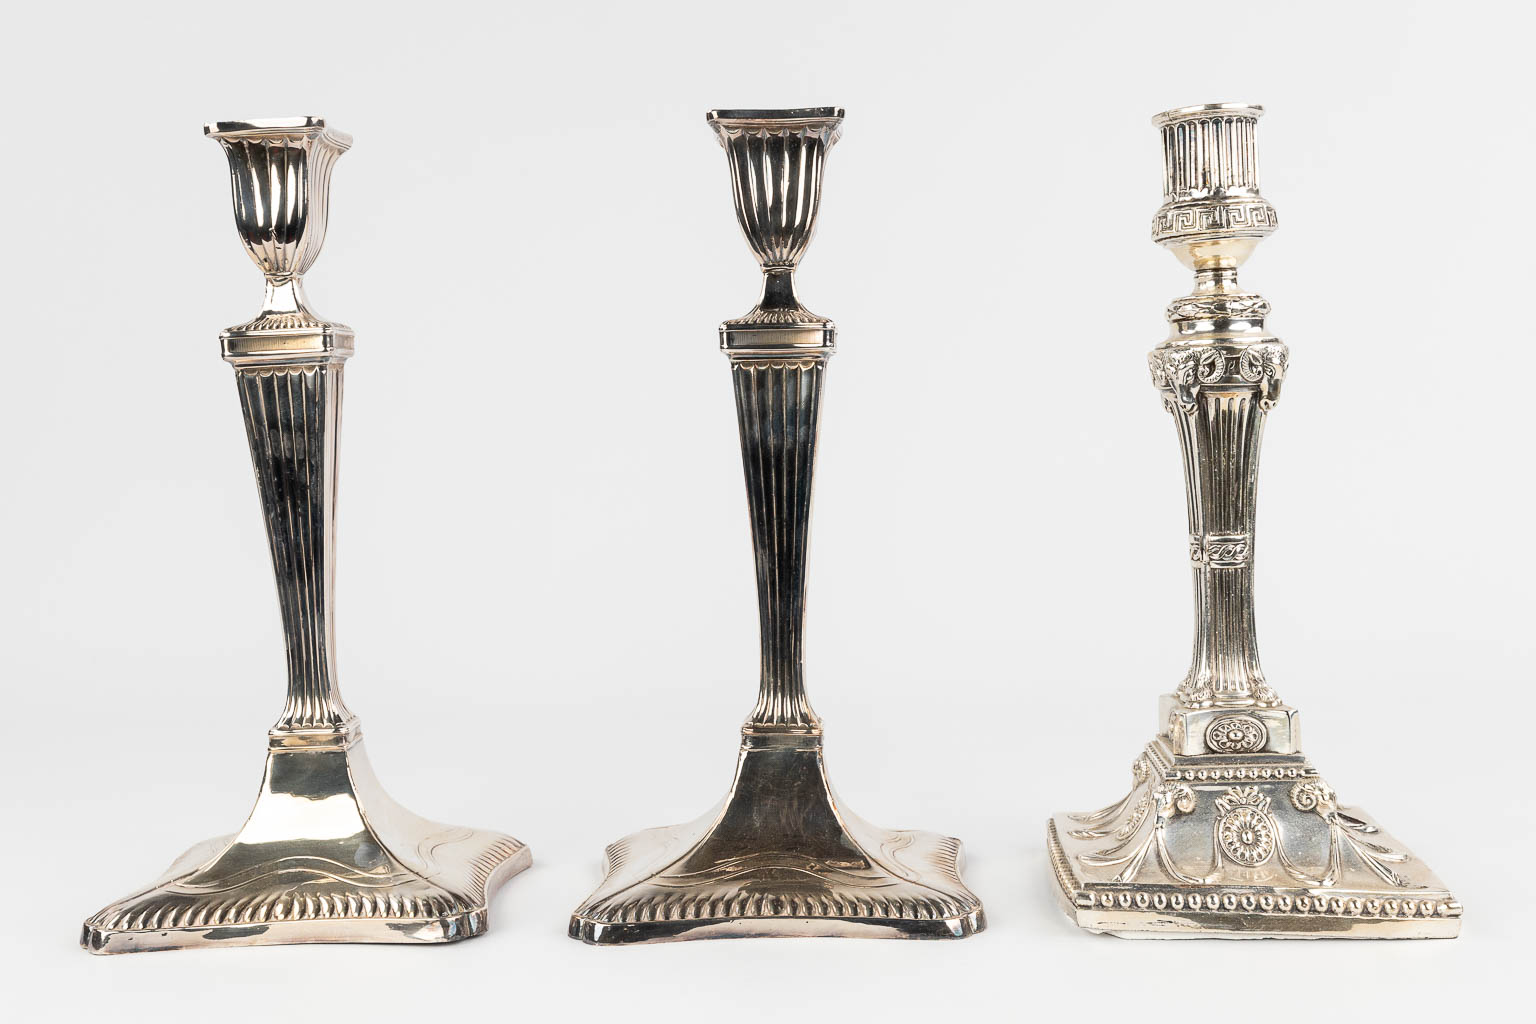 A collection of 3 silver candlesticks, of which 2 are a pair. (L: 13 x W: 14,5 x H: 29 cm)